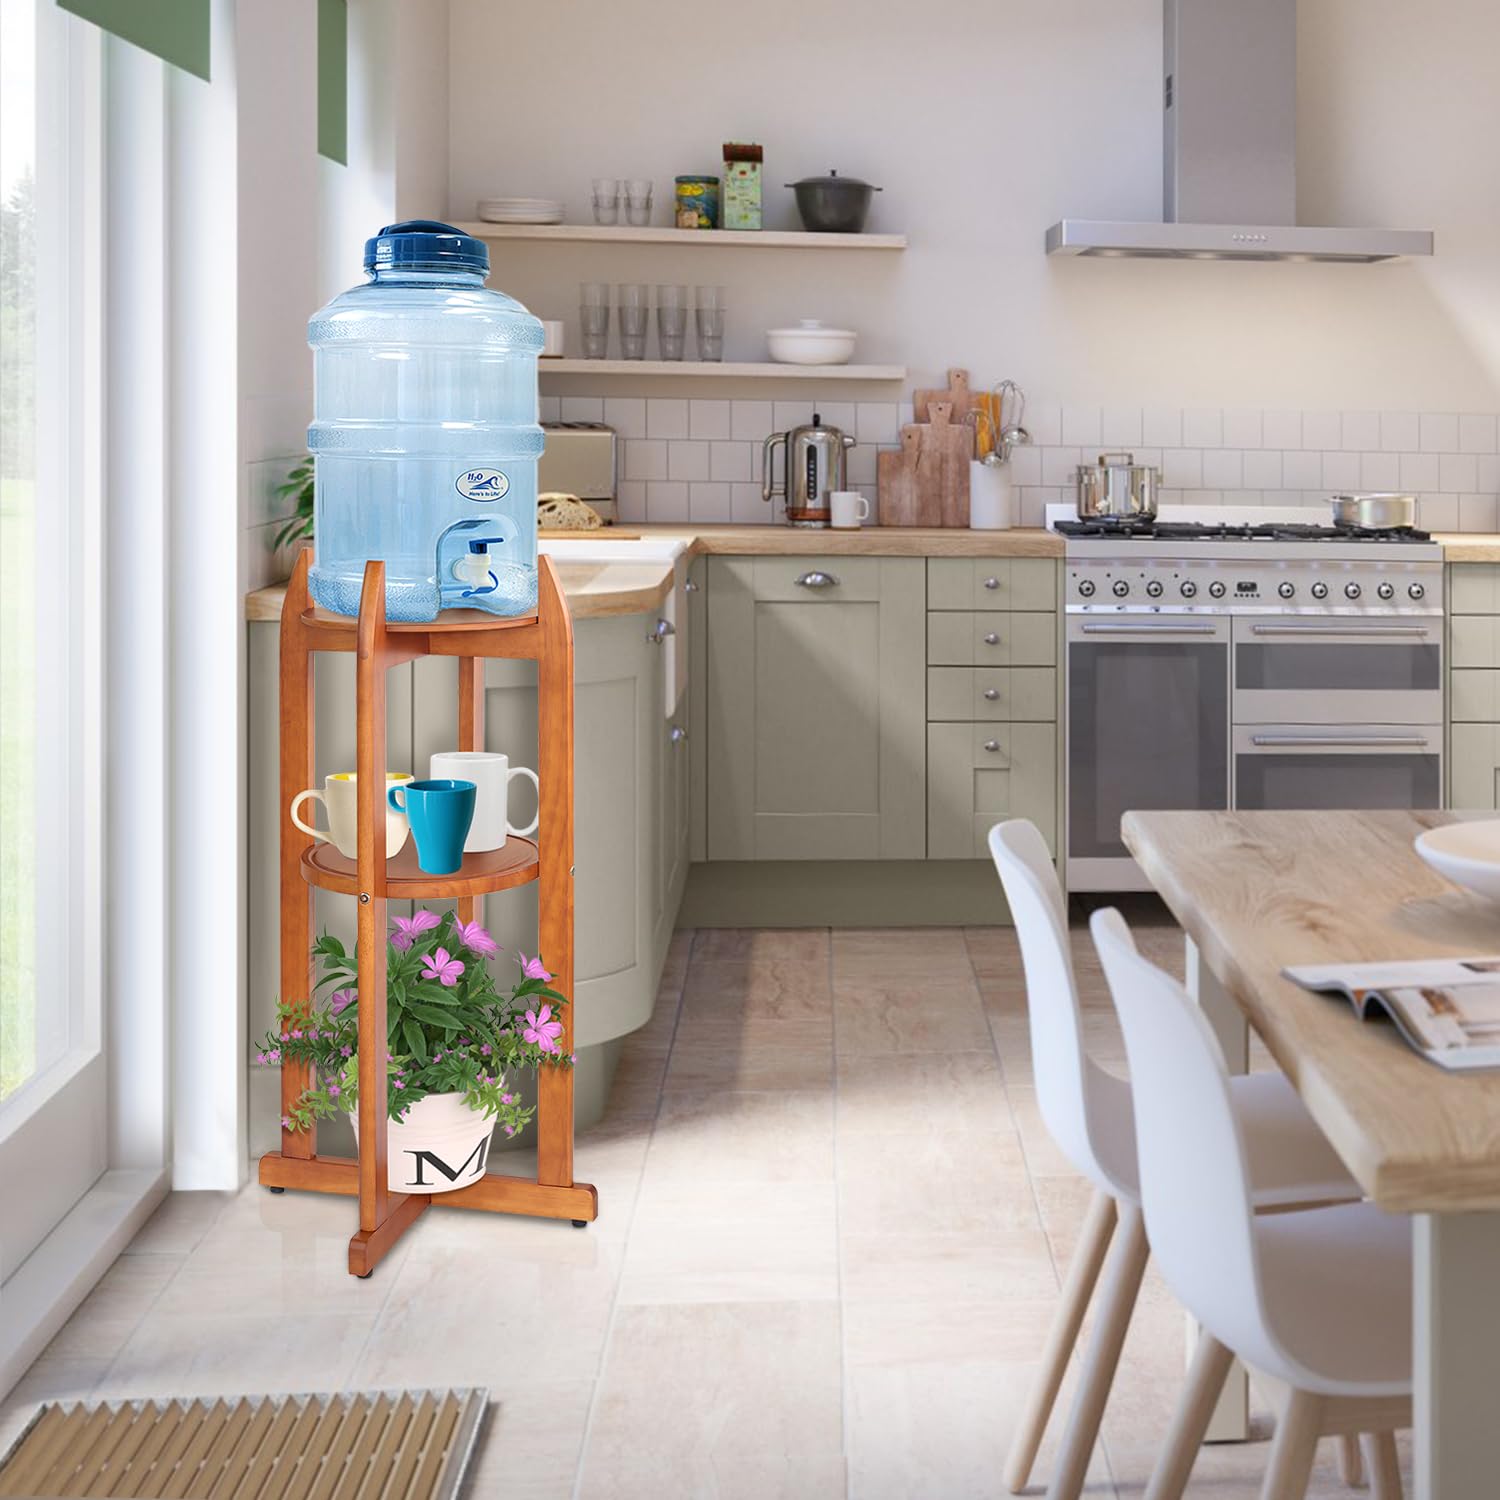 Natural Solid Wood Water Dispenser Floor Stand(32.8" Hight-11.2" Wide) Drink Dispenser Floor Stand with 2 Round Shelfs Included for 1-5 Gallon Water Bottles/Crocks, Water Jug and Plant Stand-Light